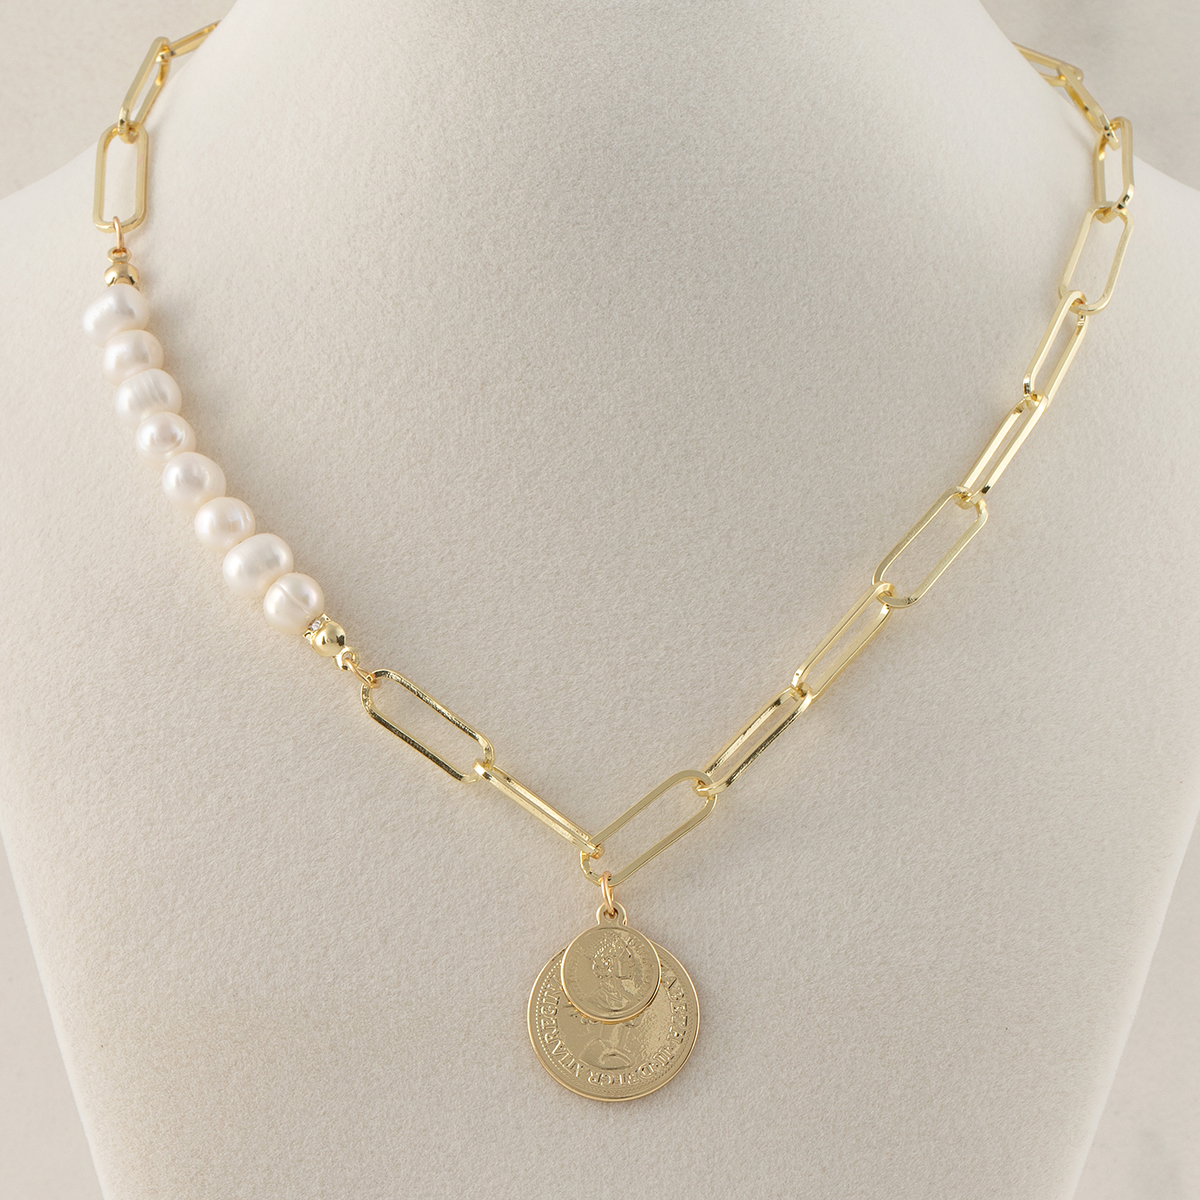 NECKLACE PEARLS LINKS CIRCLE GOLD ADJUSTABLE